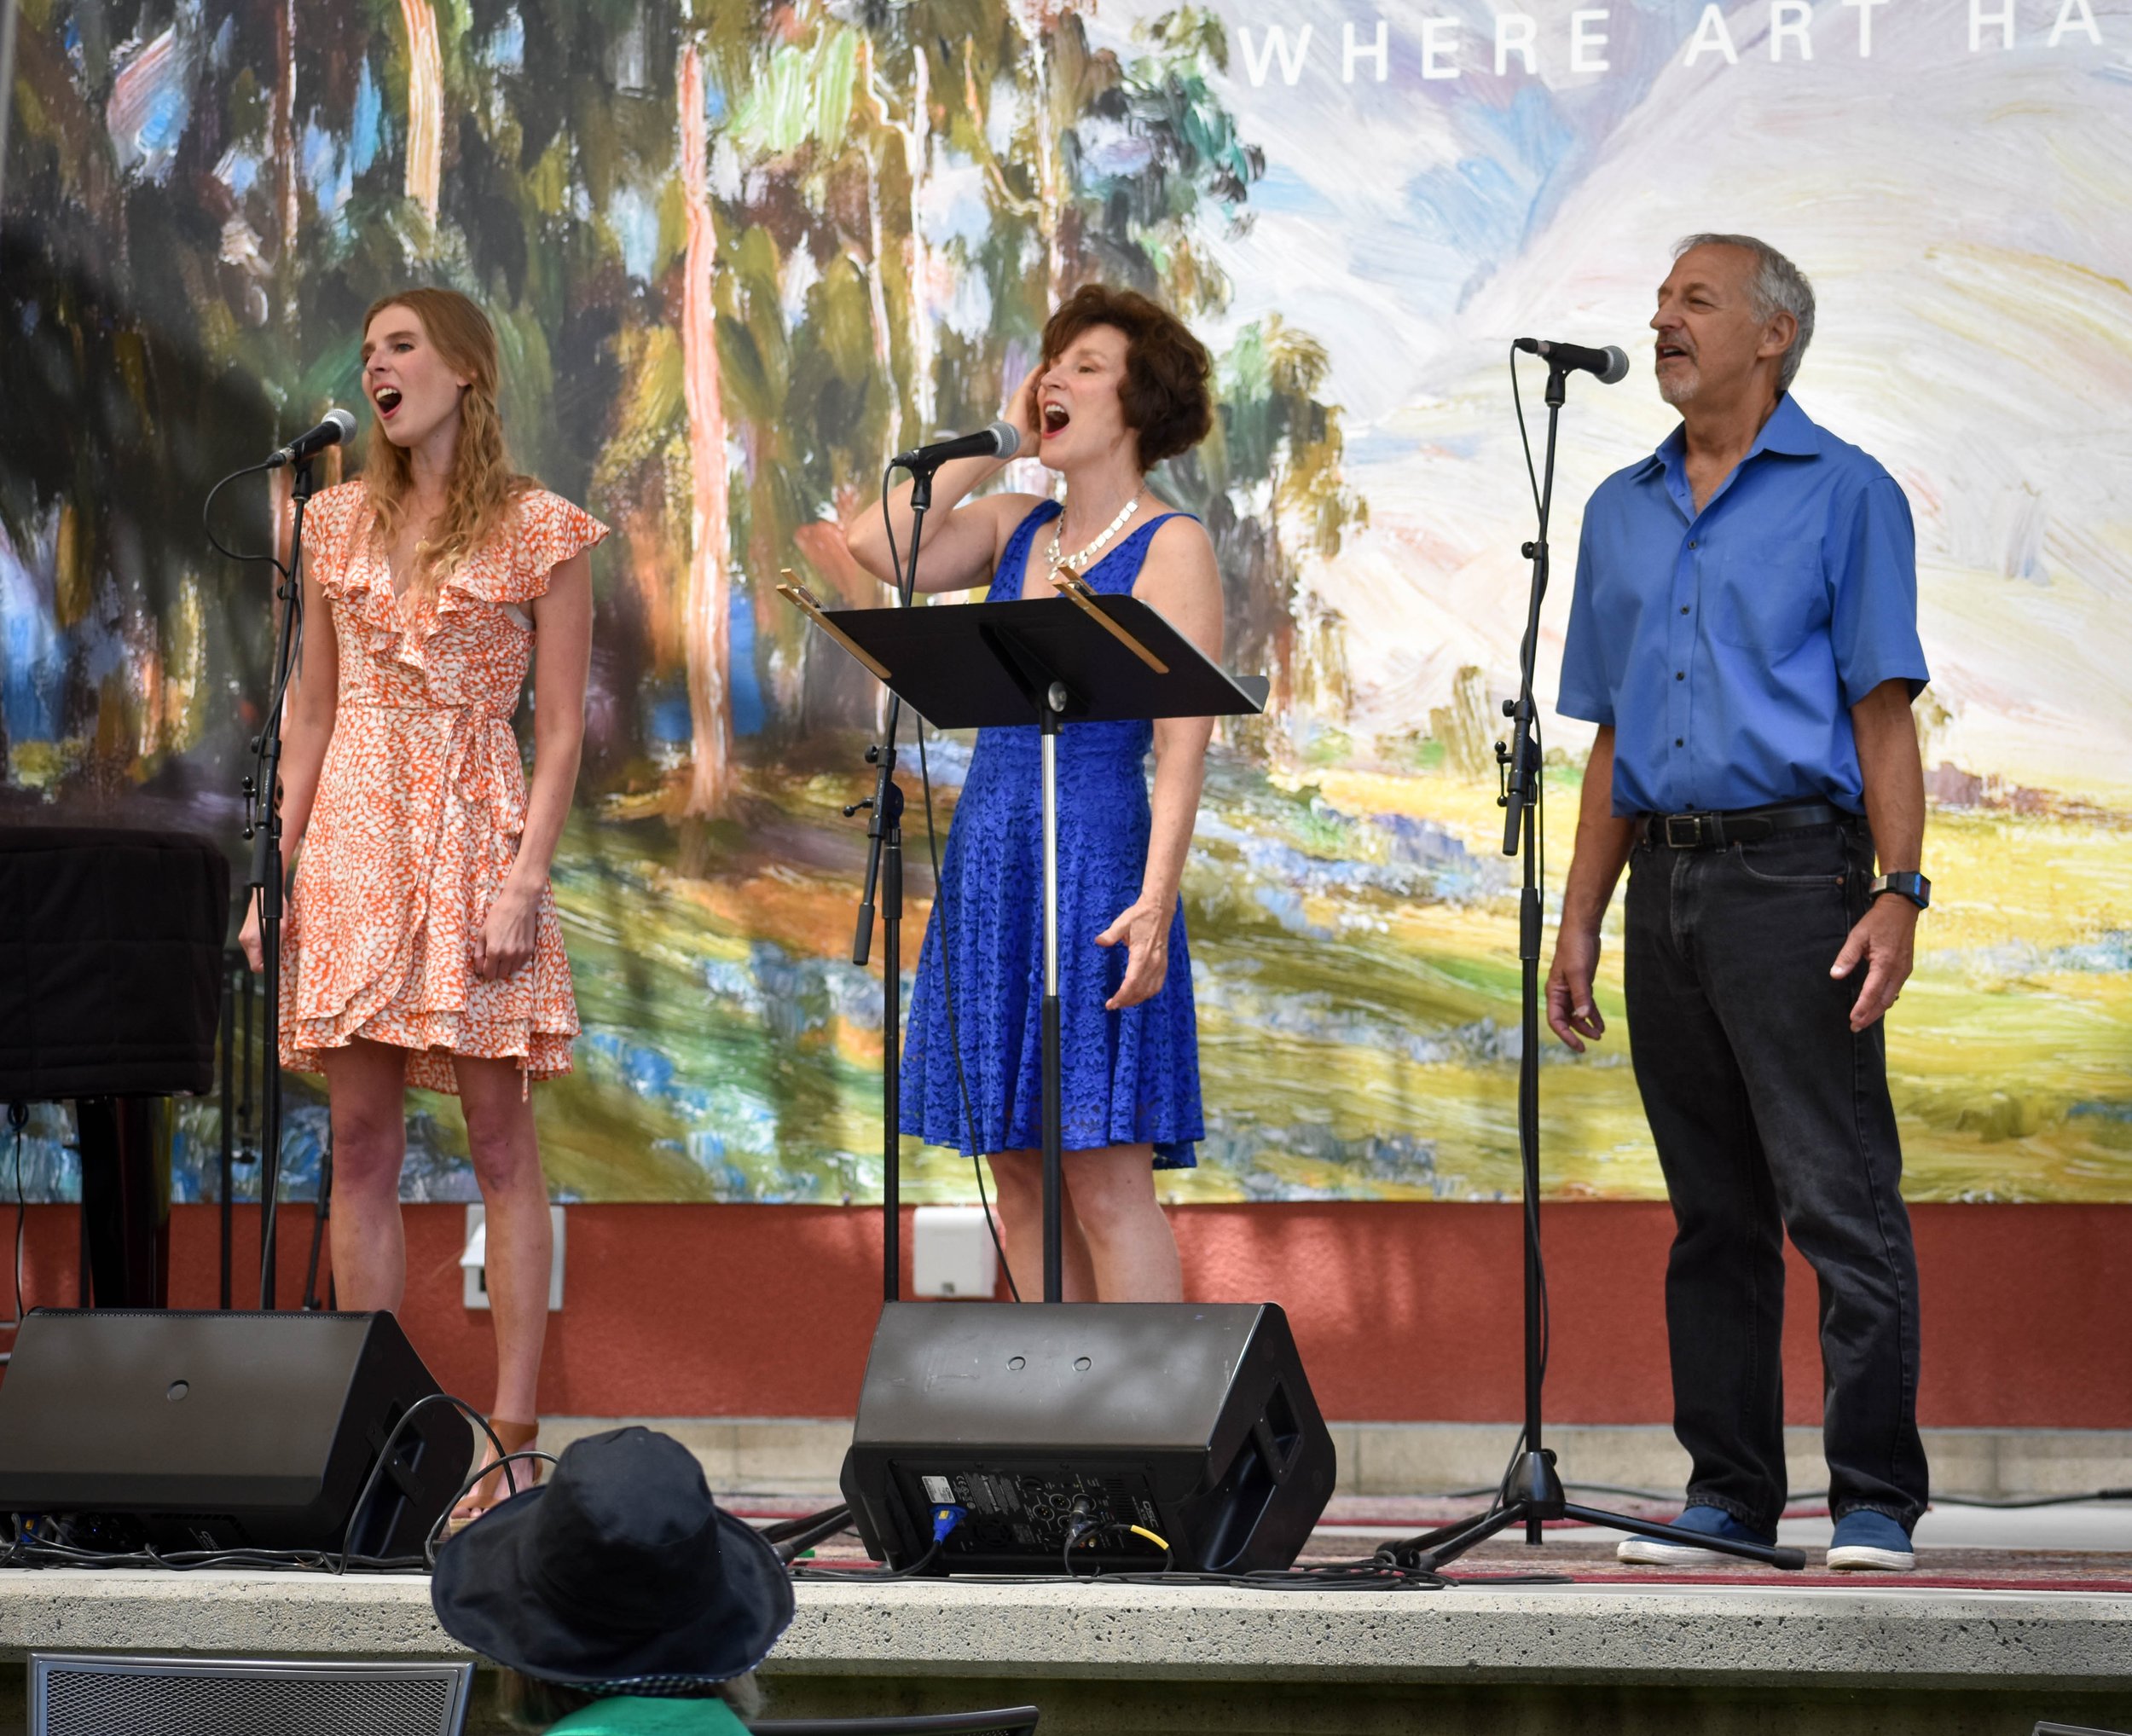 07-17-2022 LCCB Fest of Arts Summer Concert Series by Peyton Webster91-39.jpg